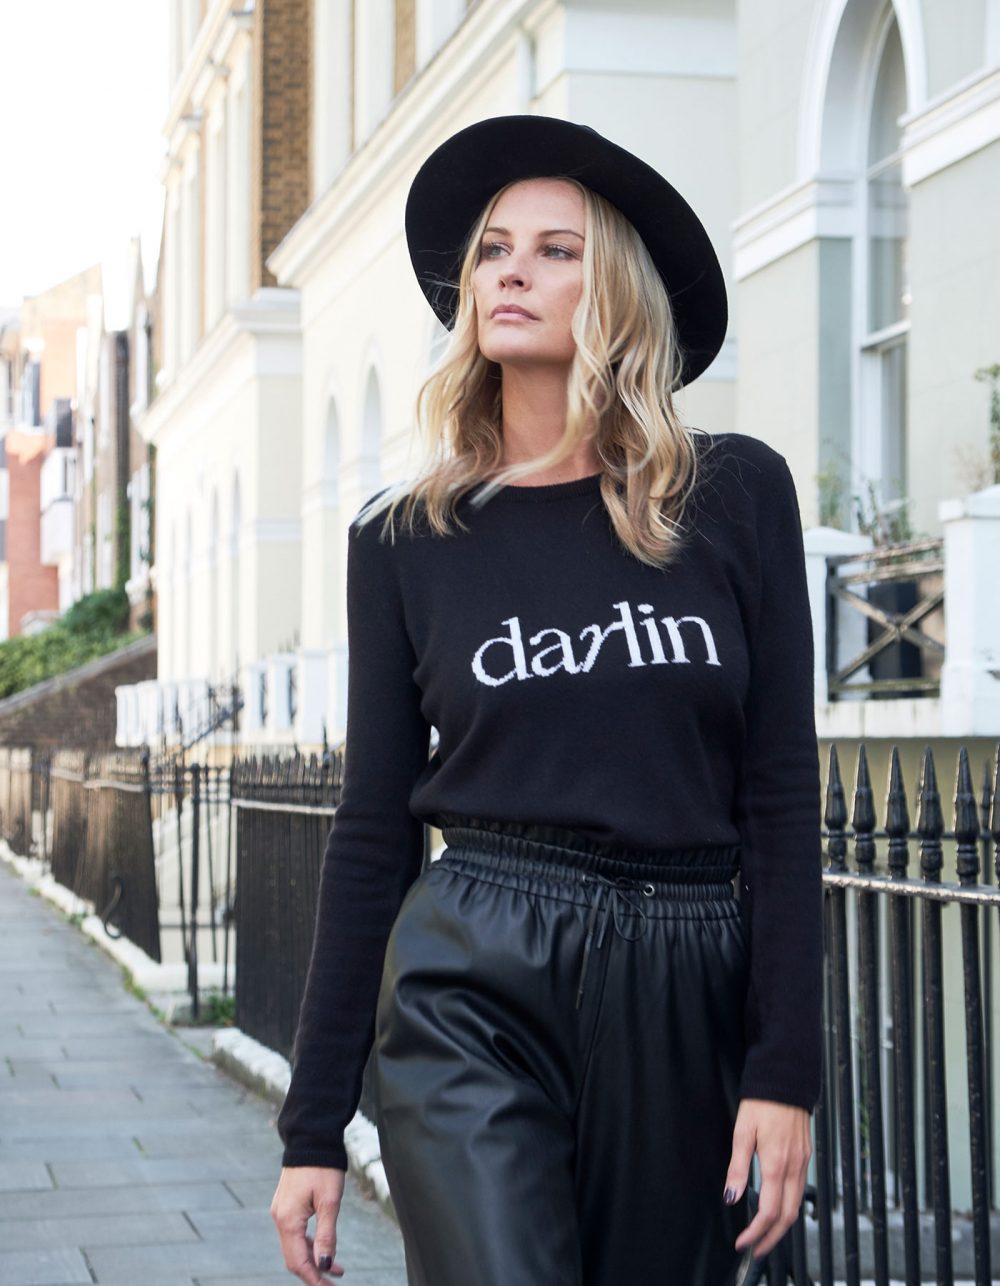 Model on a residential street wearing a hat and black cashmere jumper with the word darlin on the front.